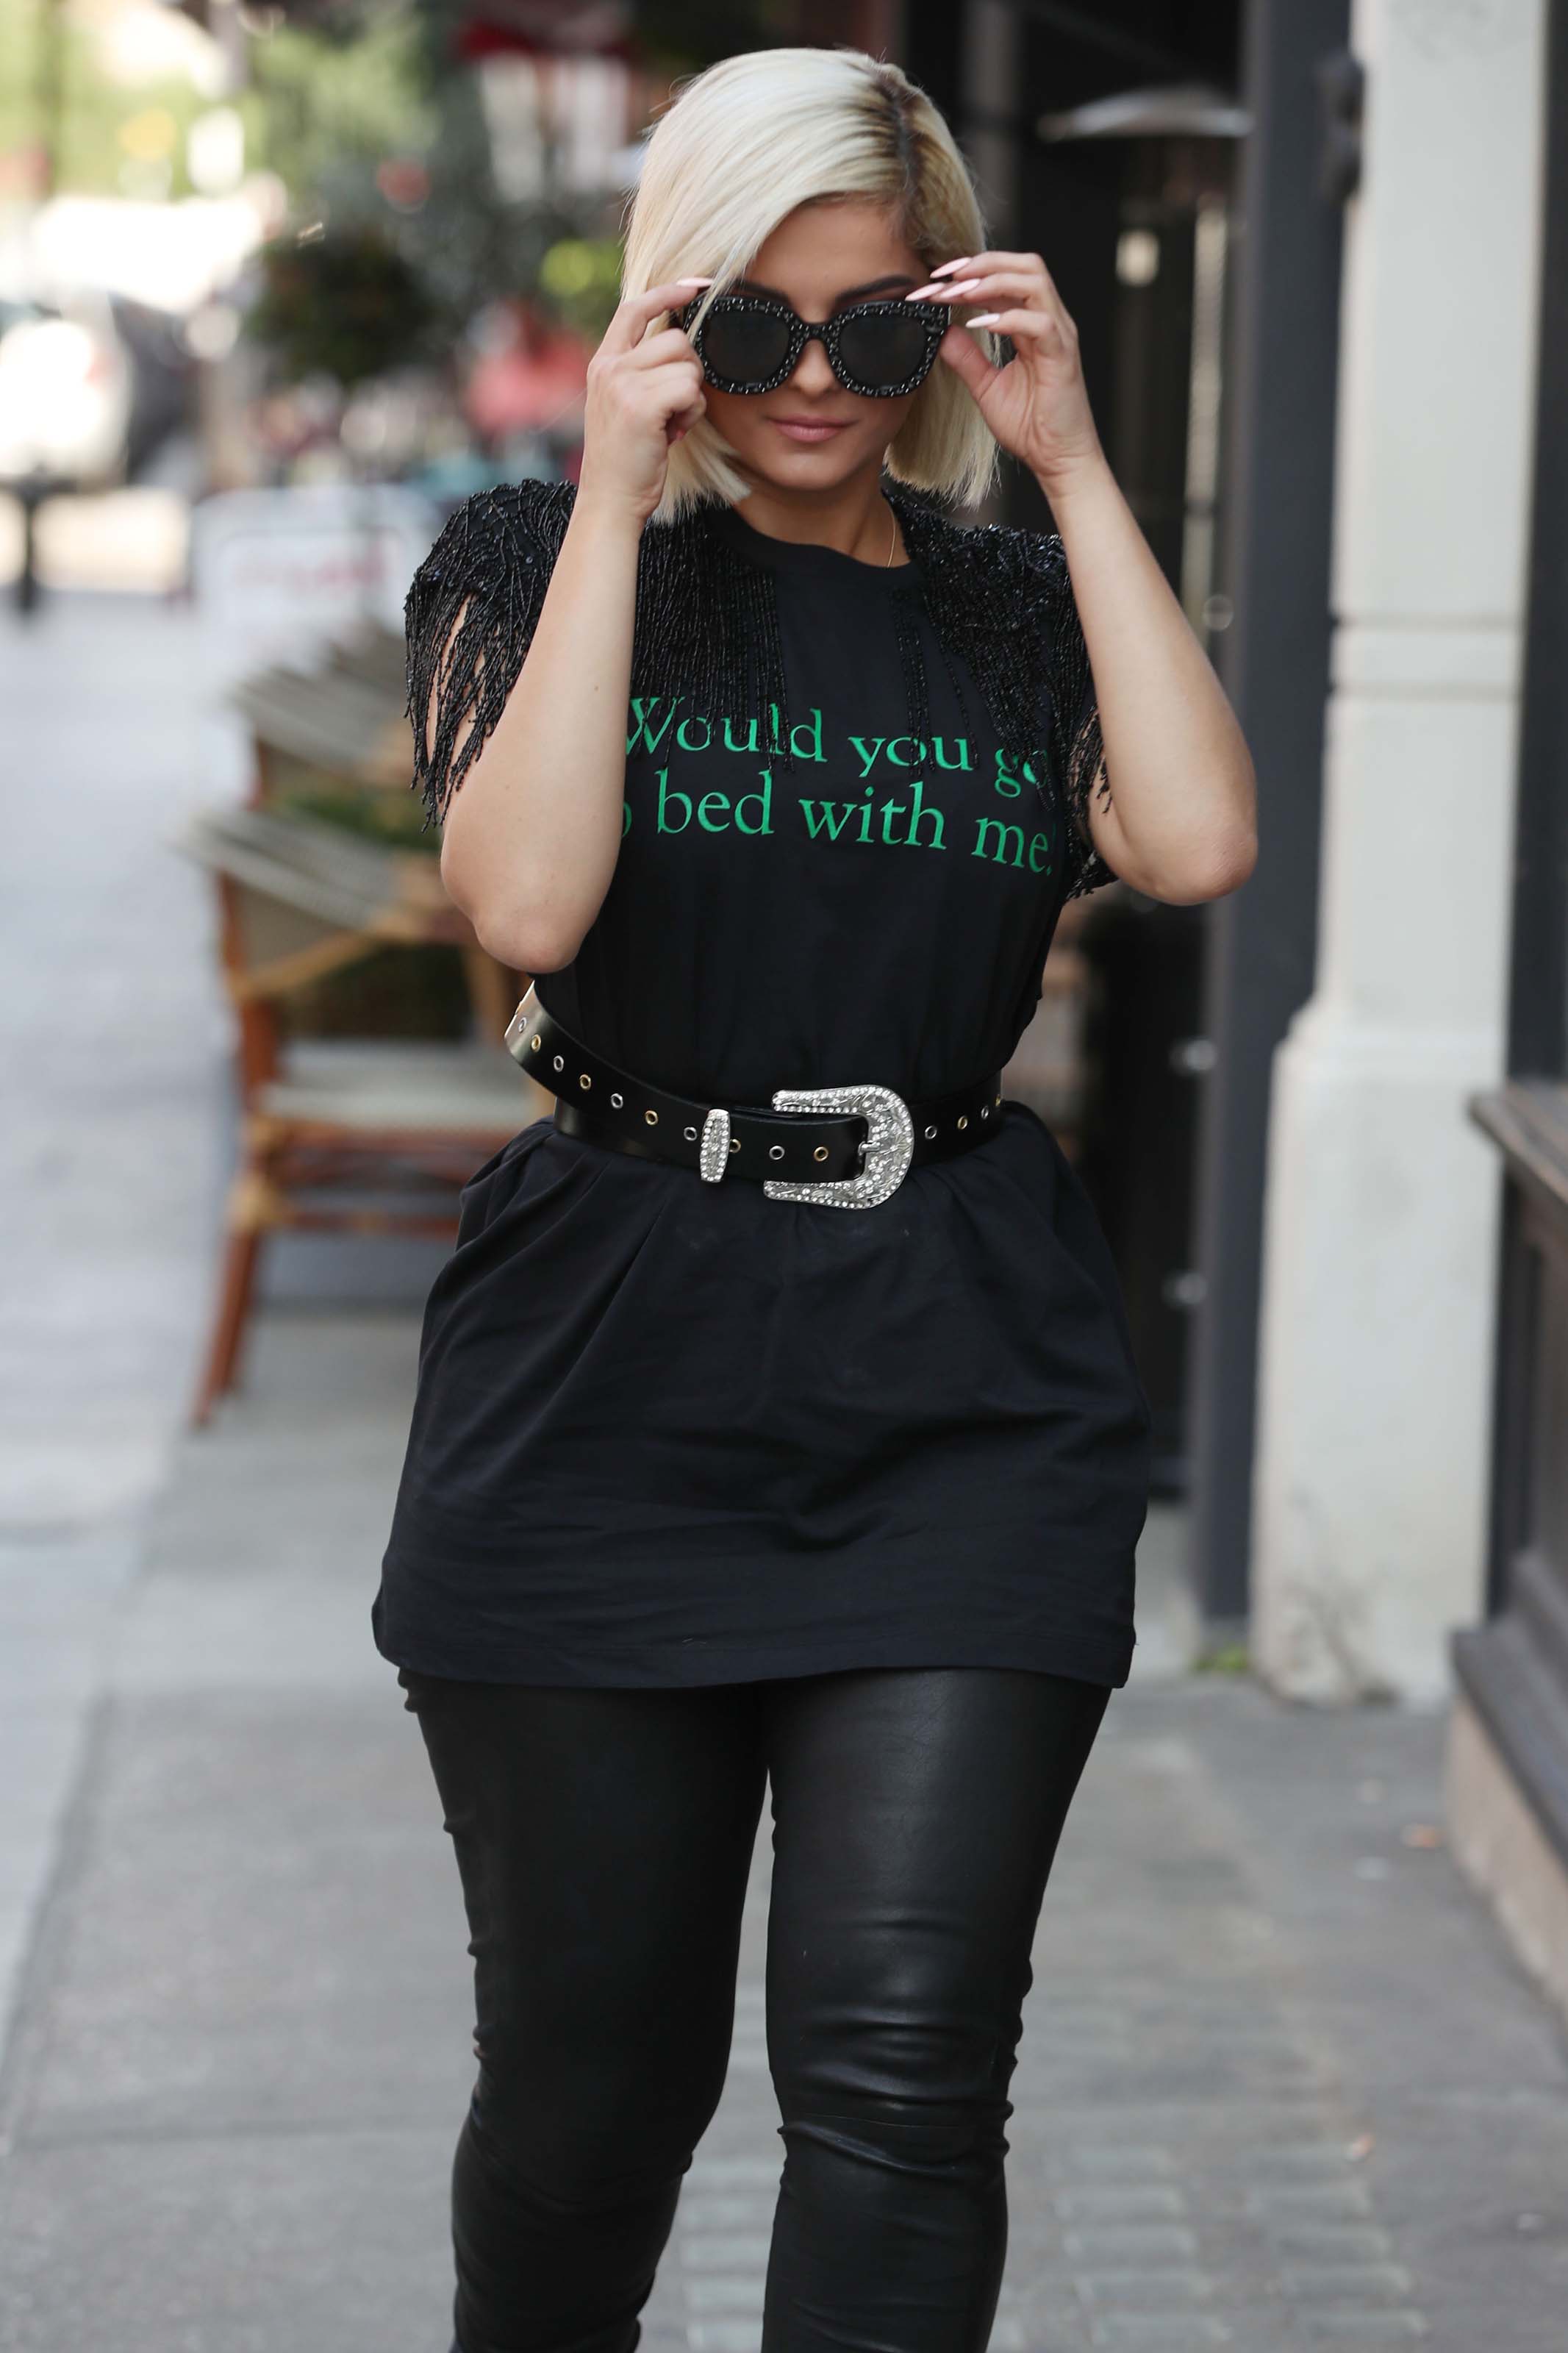 Bebe Rexha stepped out in London